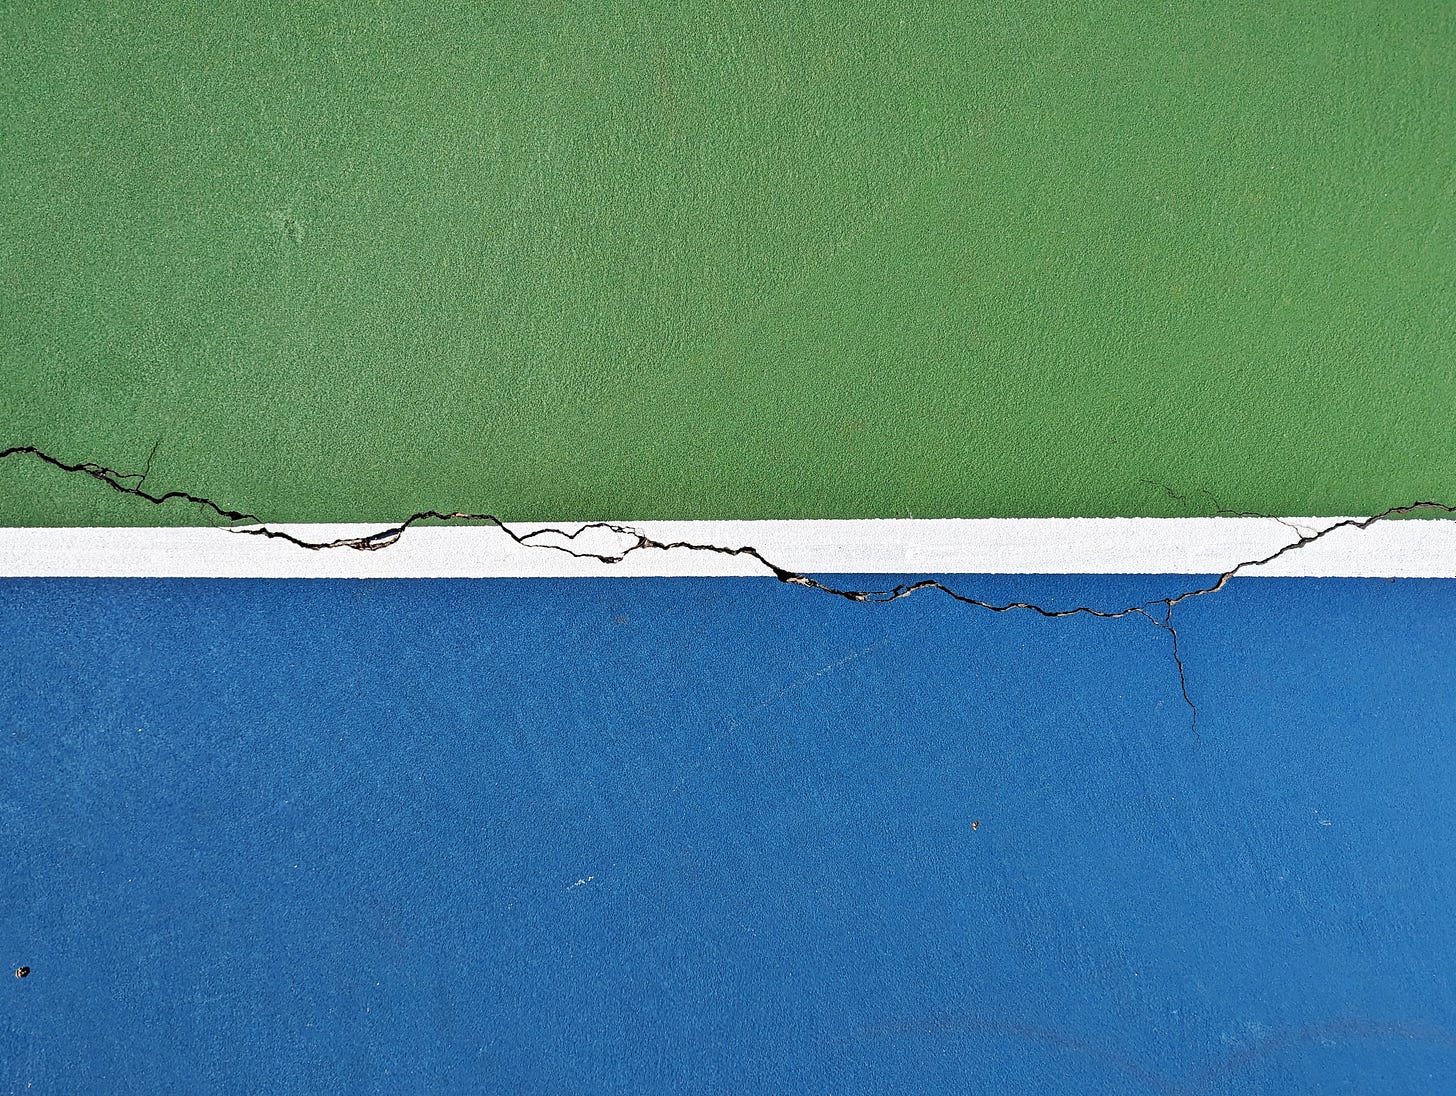 A detail shot of a tennis/pickleball court showing a crack along a horizontal white line dividing a blue area from a green area.